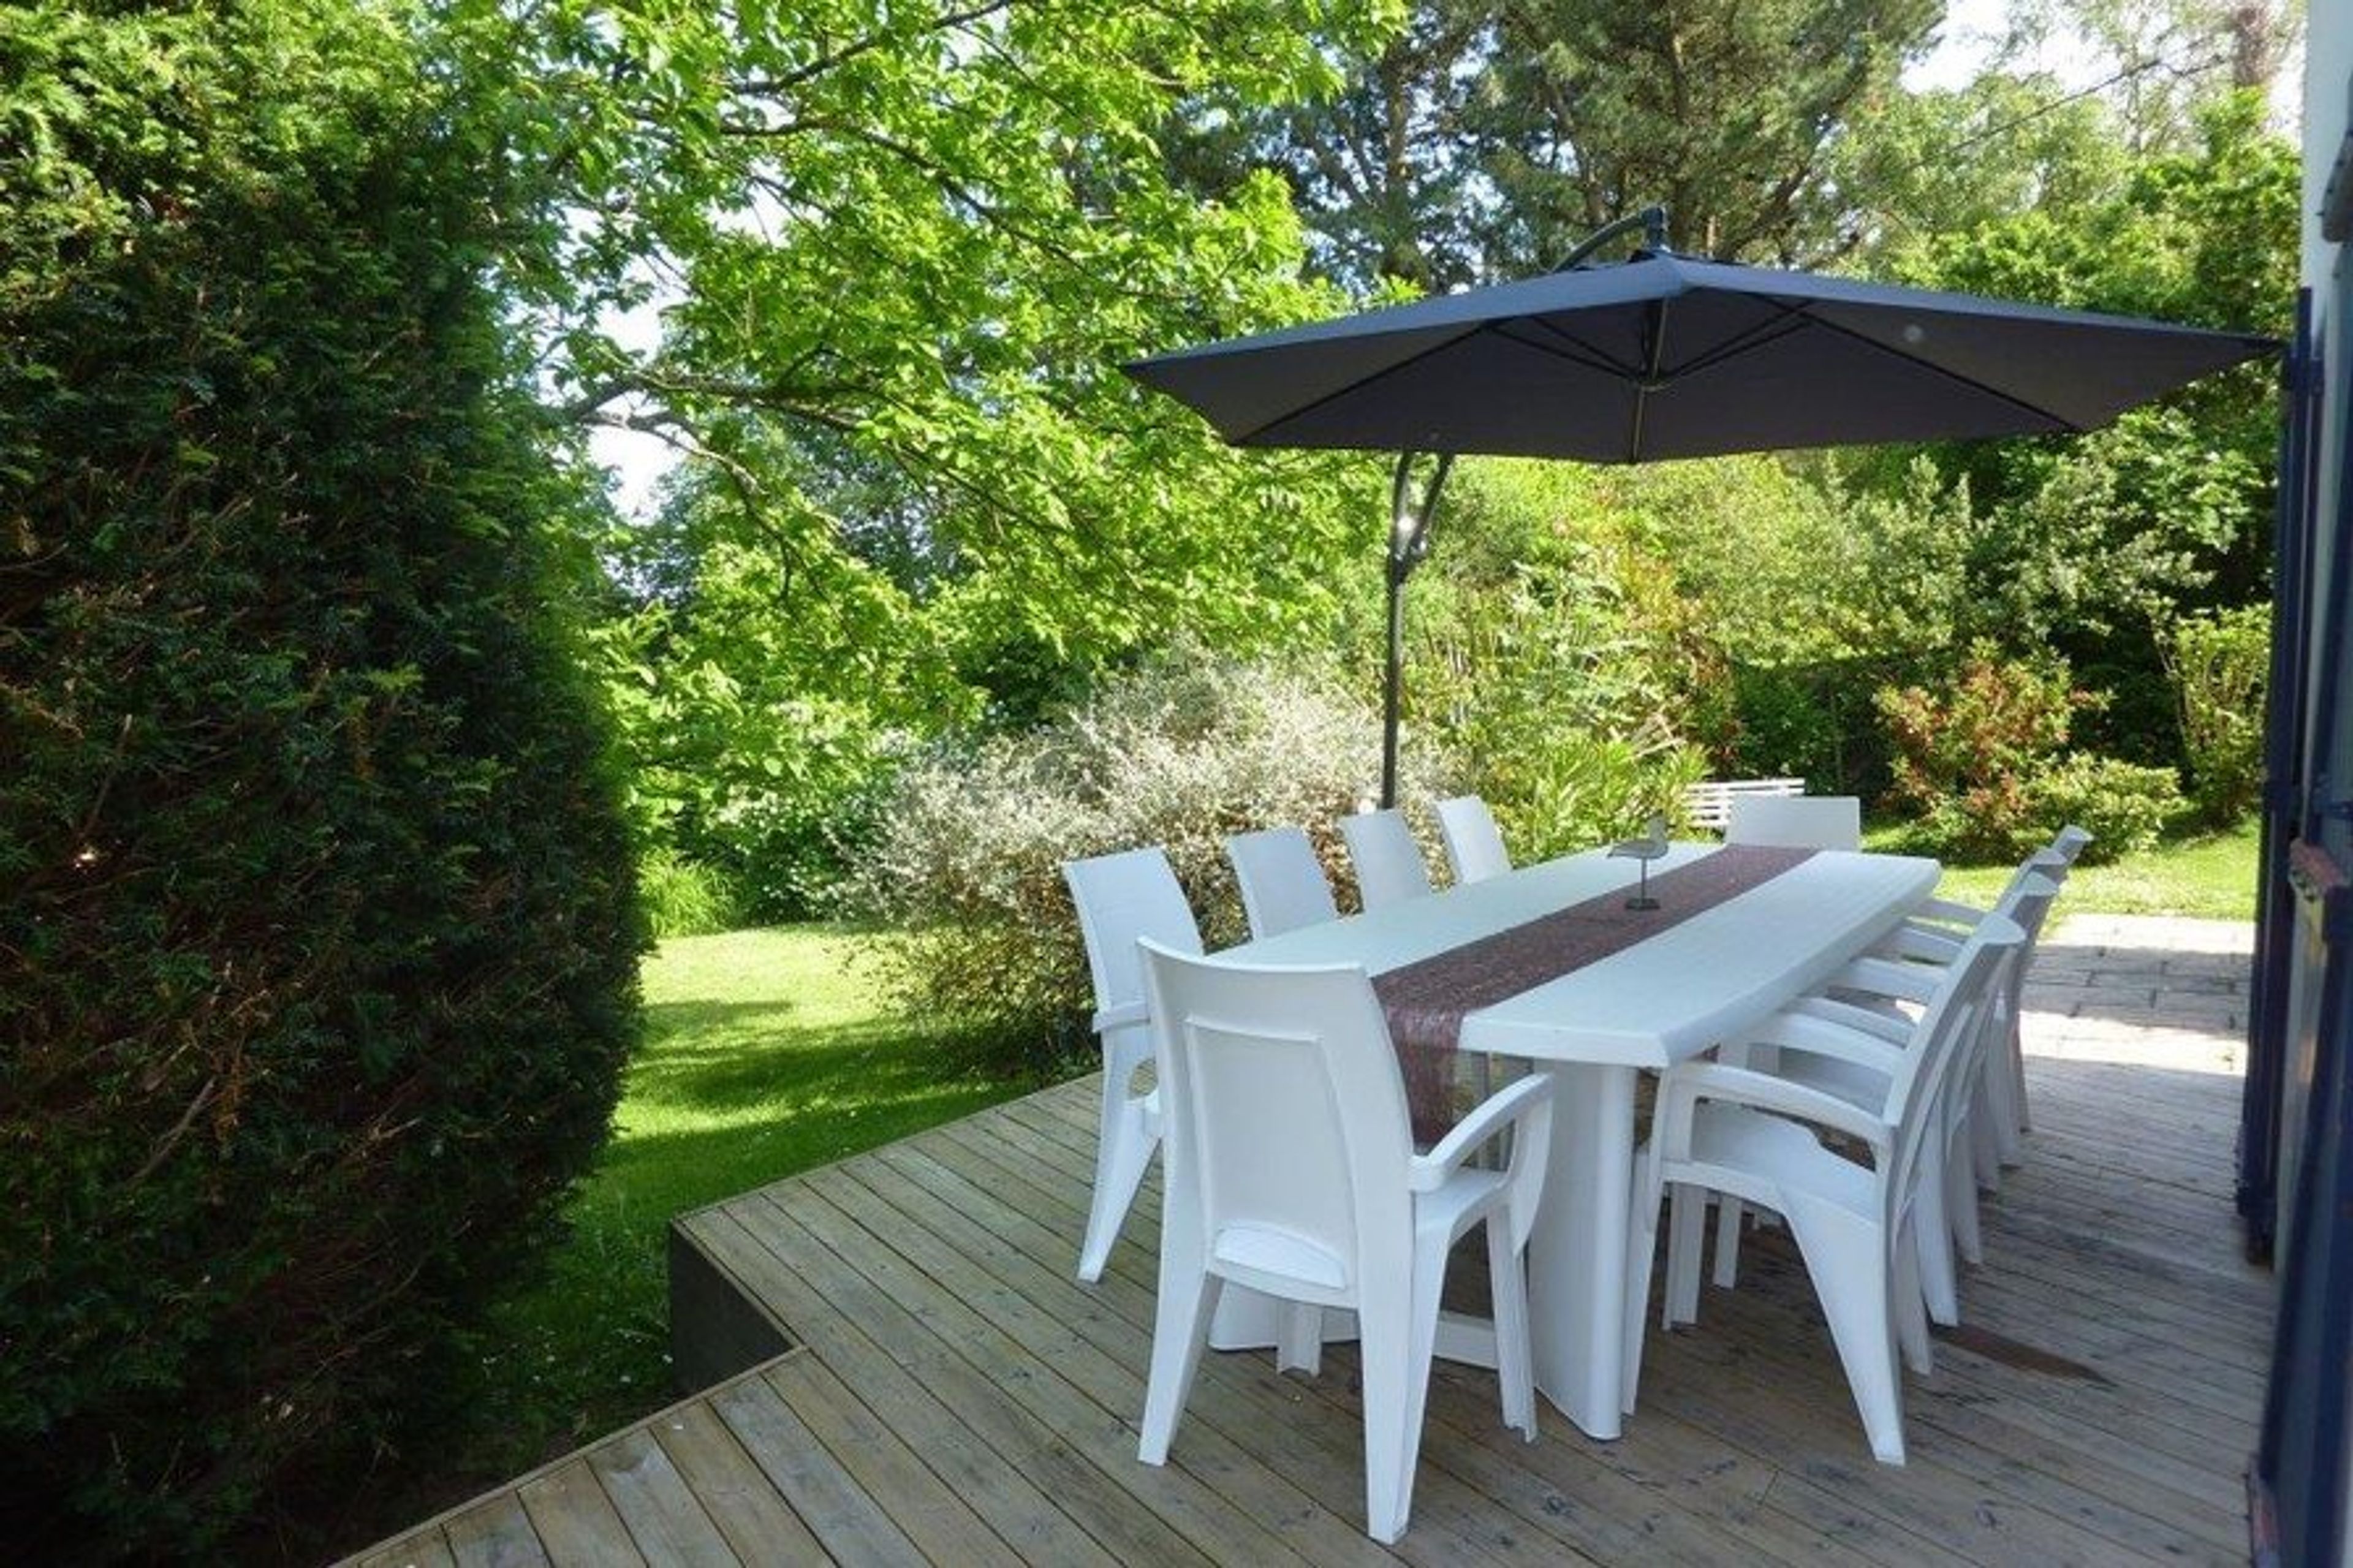 Dining furniture on the decked terrace overlooking garden.